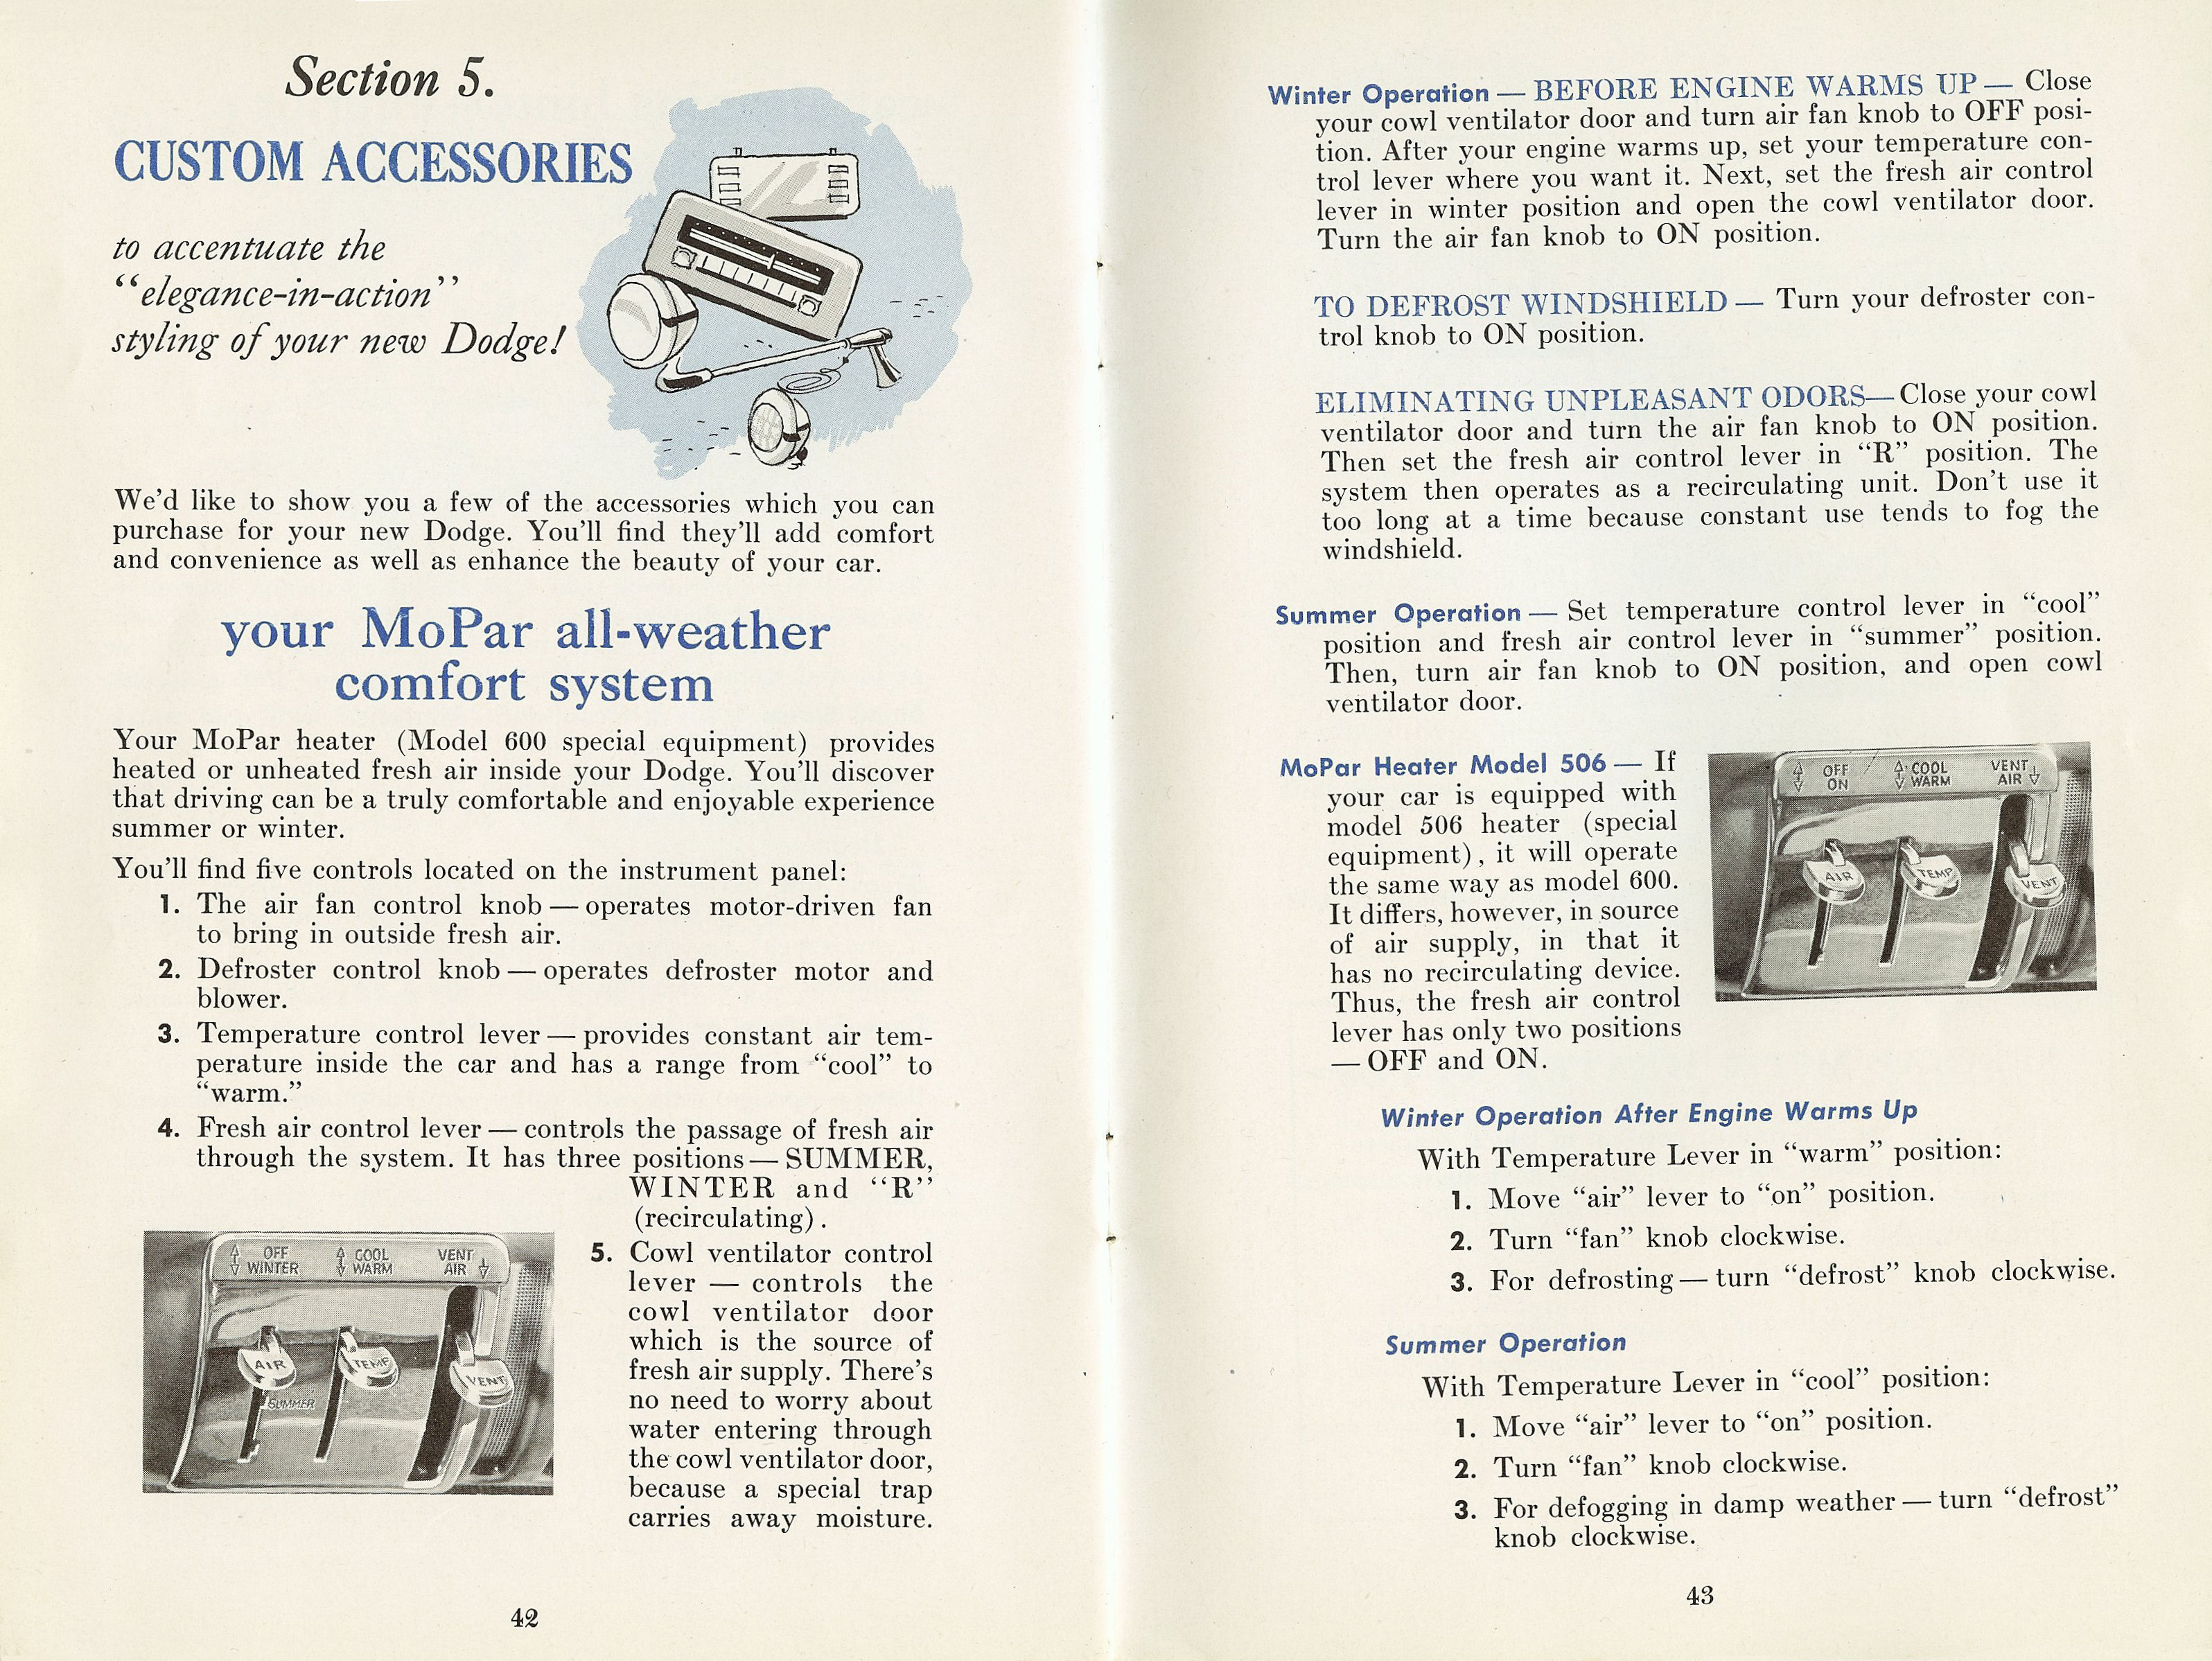 1954 Dodge Owners Manual-42-43